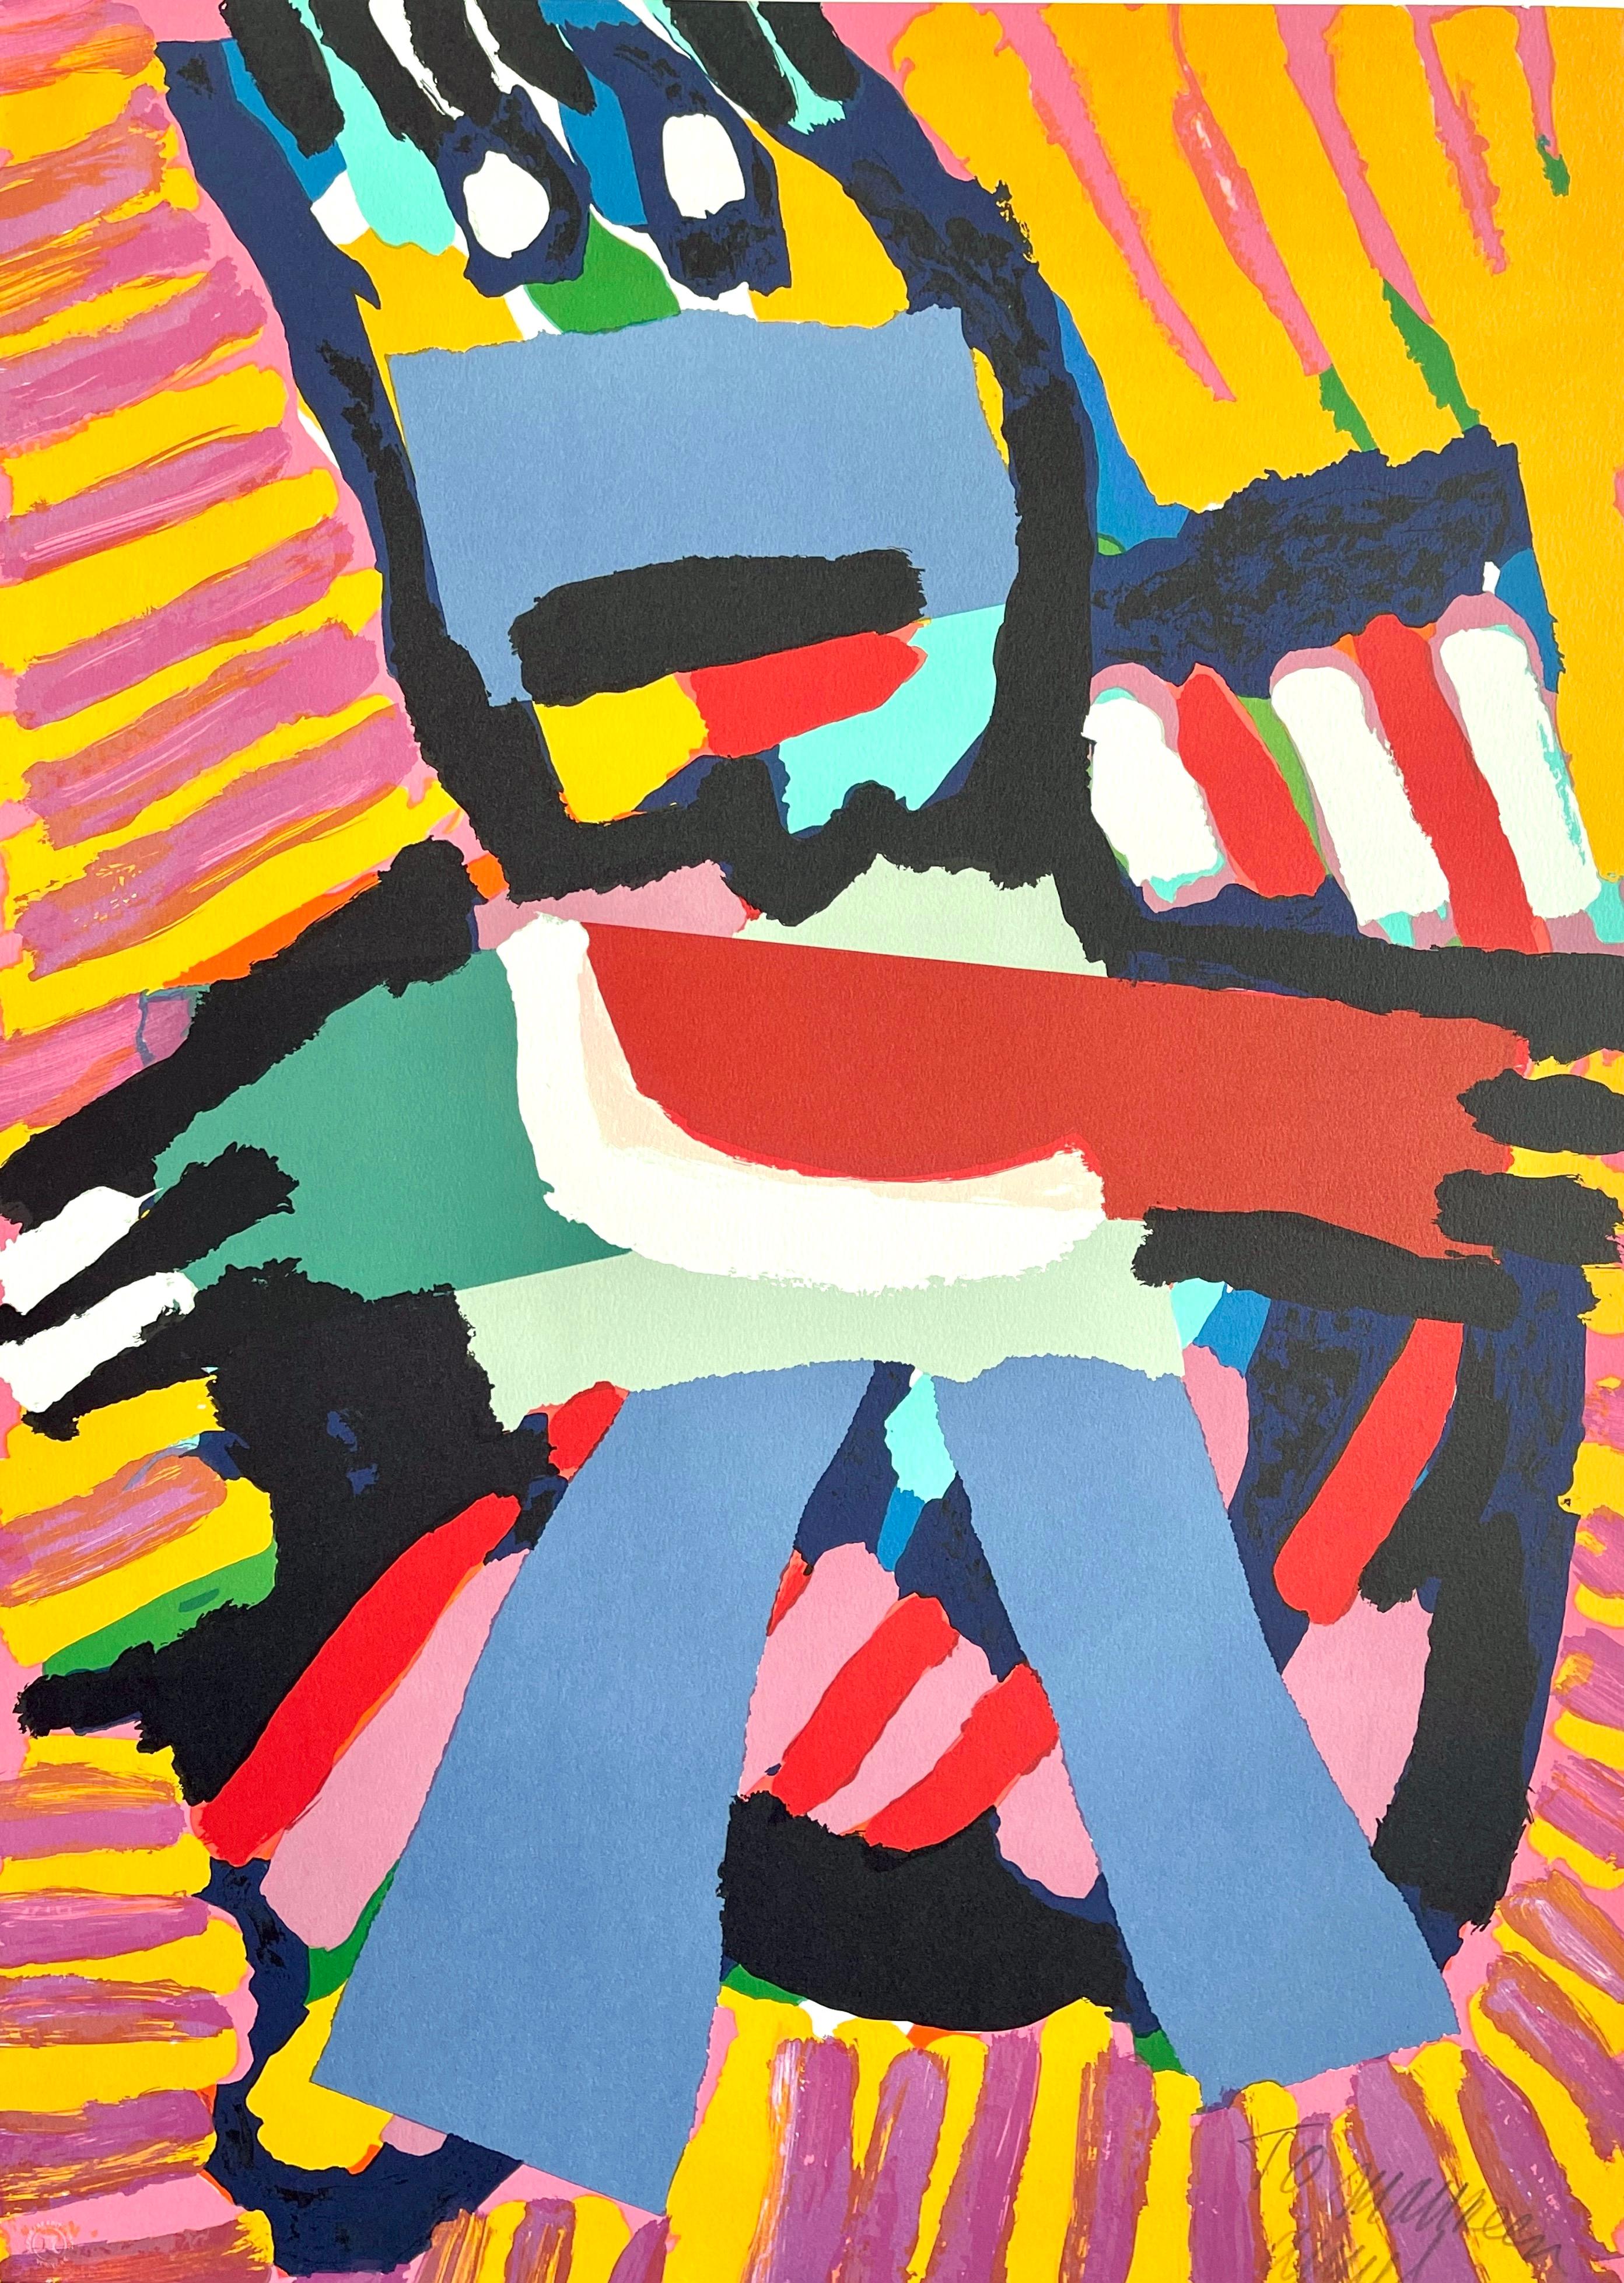 Karel Appel Abstract Print - BLUE BOY Signed Lithograph, Abstract Figure, Blue Pants, Pink Yellow Stripes